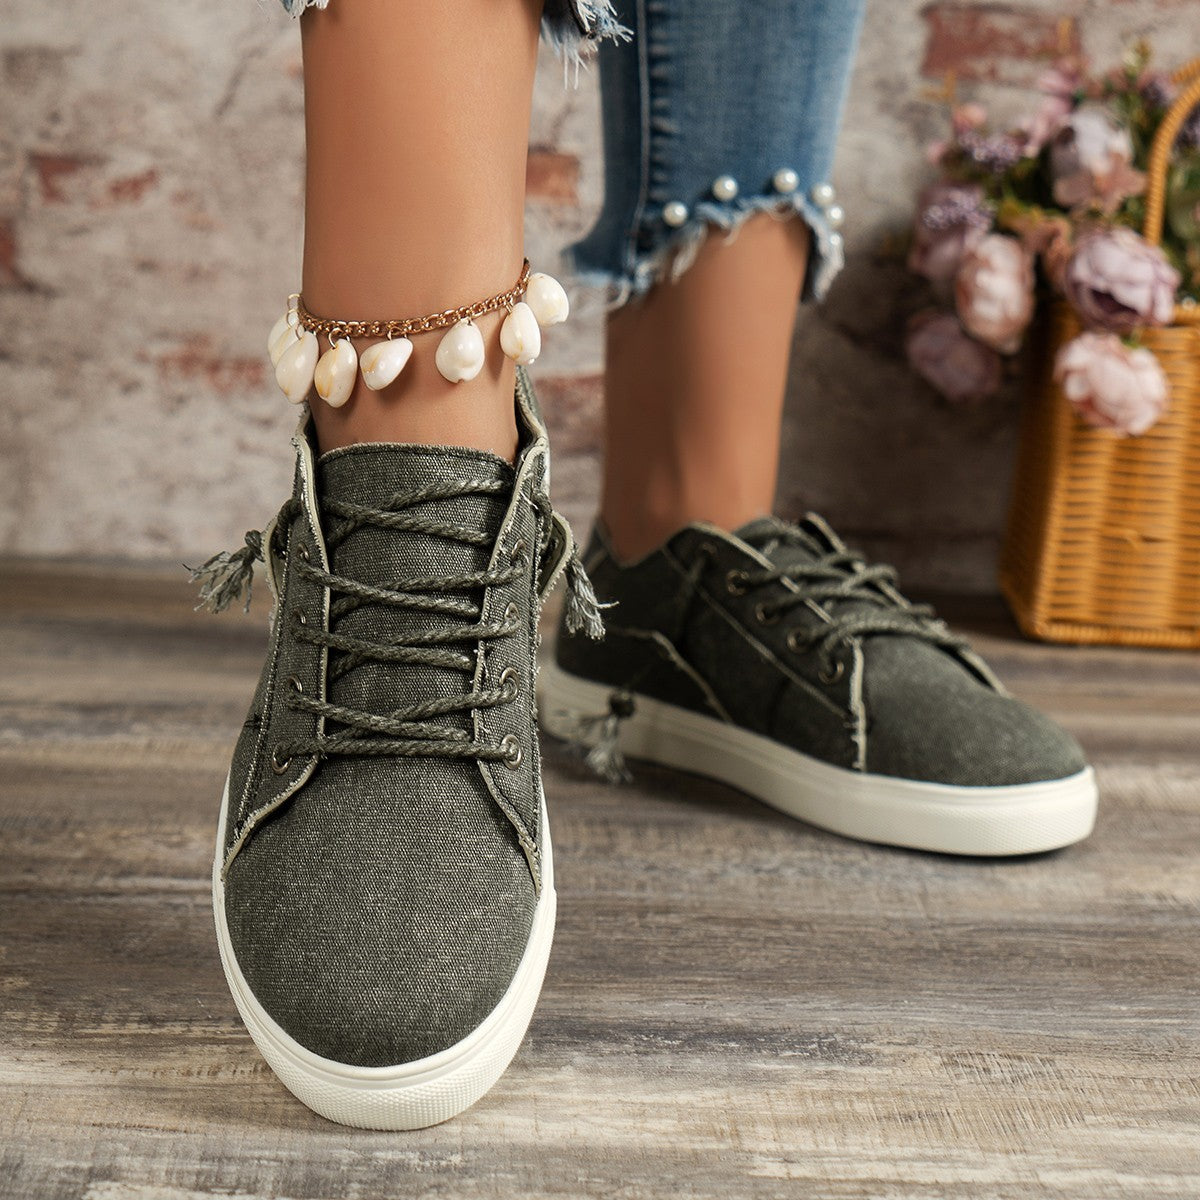 Denim Low-top Lace-up Sports Casual Shoes